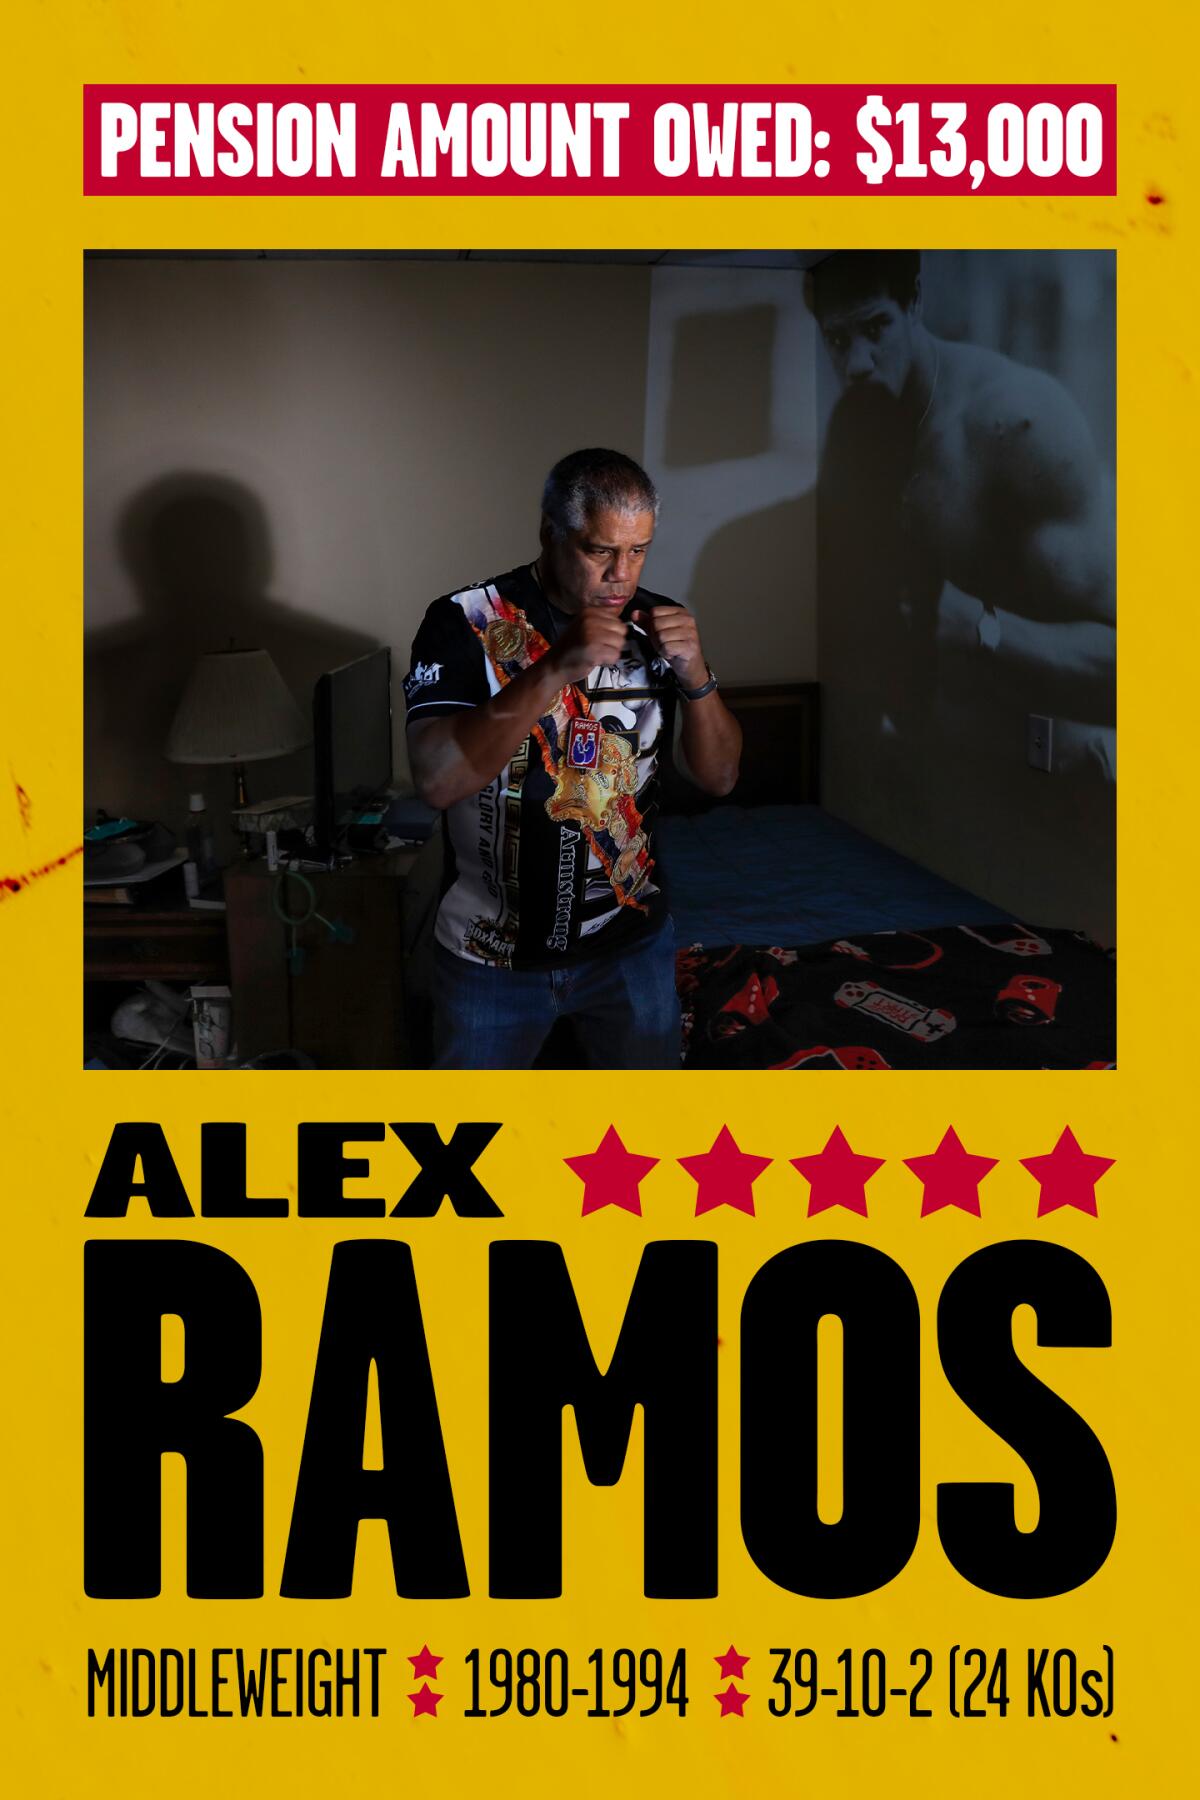 Fight poster: ALEX RAMOS, MIDDLEWEIGHT, 1980-1994, 39-10-2 (24 KOs), PENSION OWED: $13,000